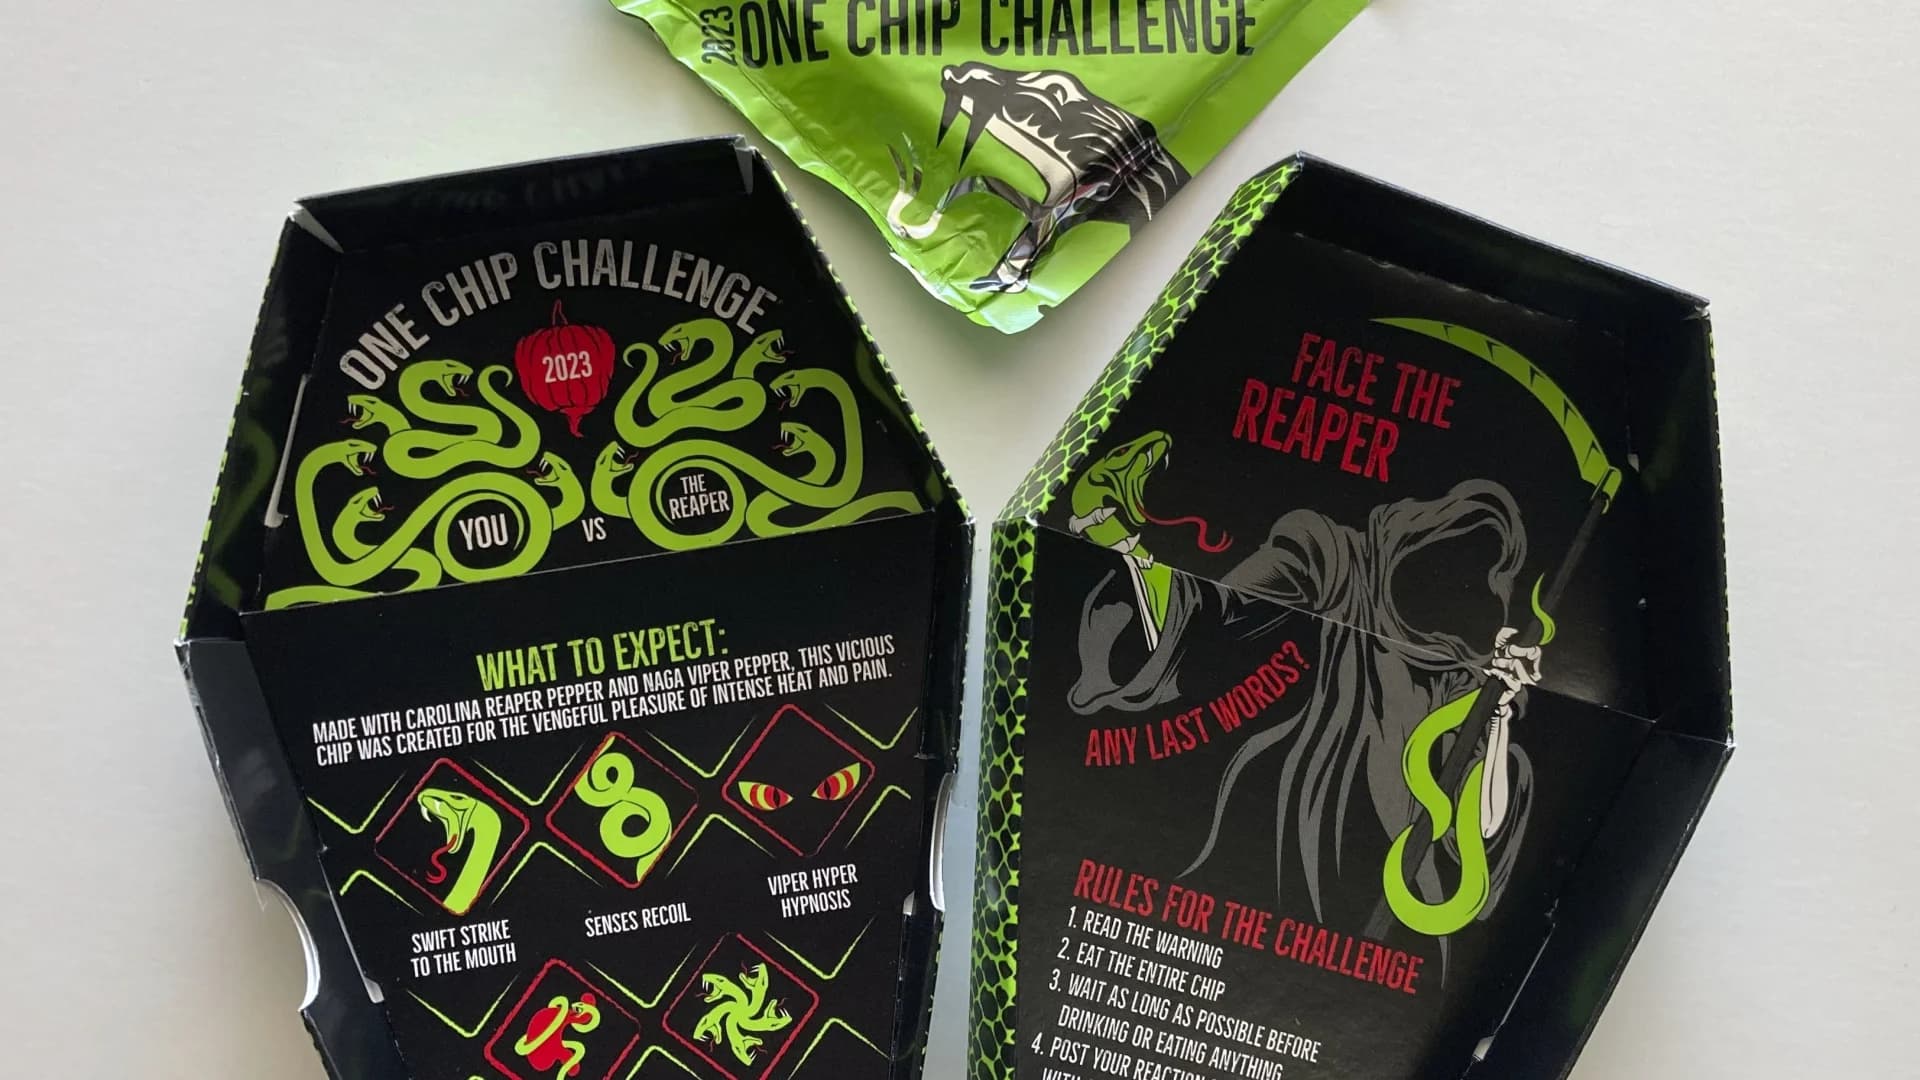 Company pulls spicy One Chip Challenge from store shelves as Massachusetts investigates teen's death